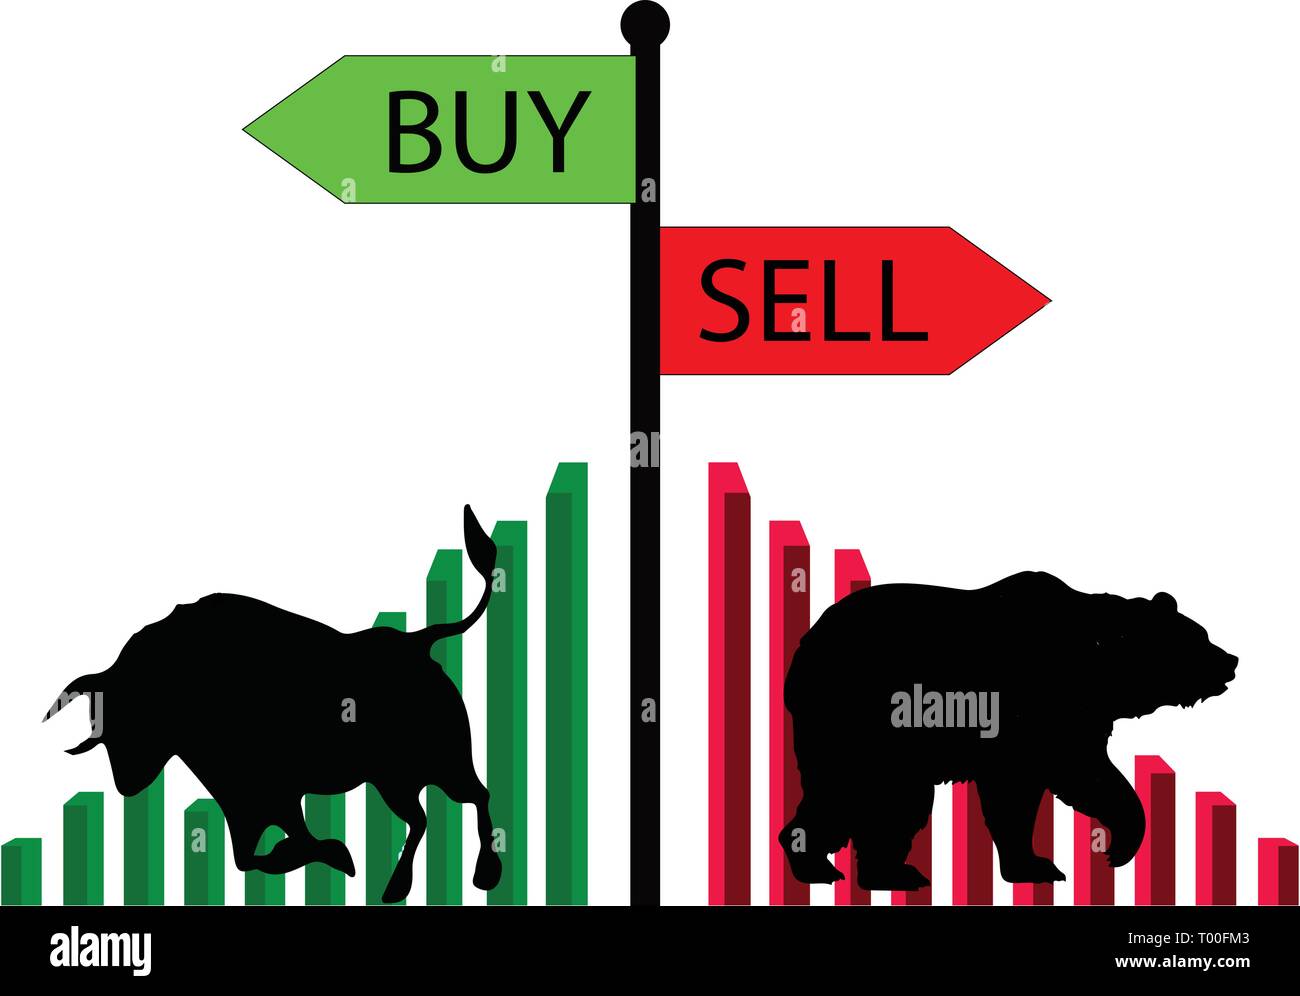 The Stock Market. Buy Or Sell. Stock Vector